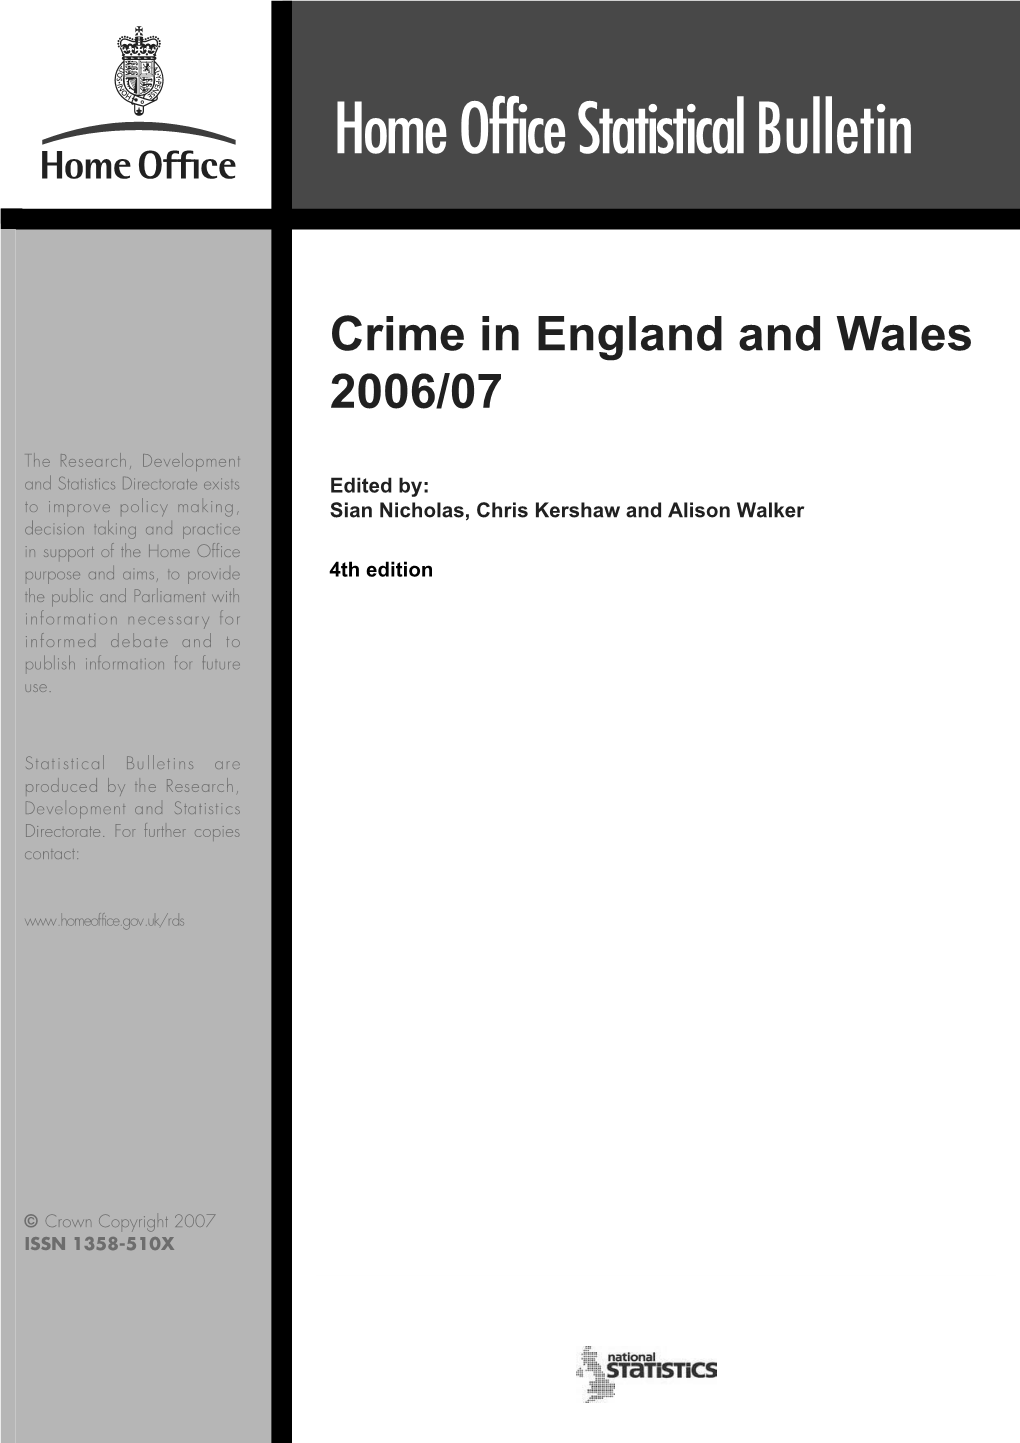 Crime in England and Wales 2006/07